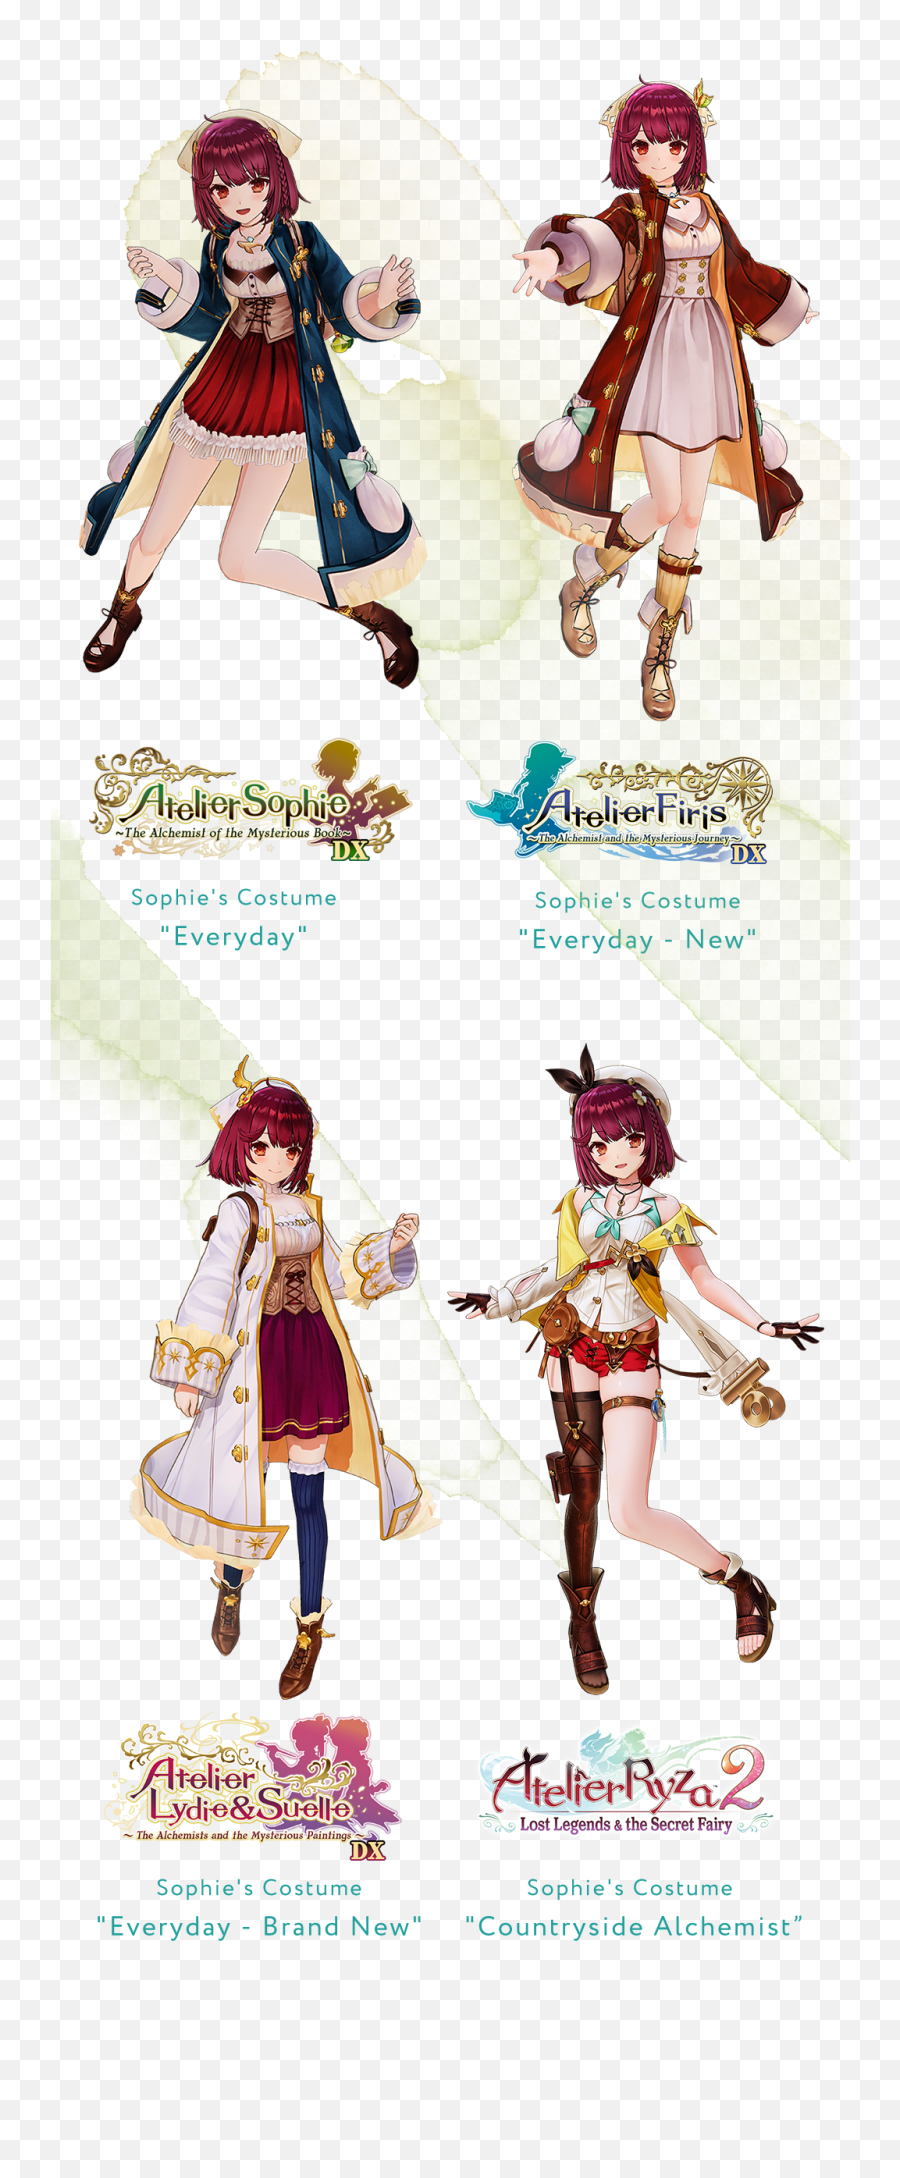 Atelier Sophie 2 The Alchemist Of The Mysterious Dream Emoji,Emotions Outfits